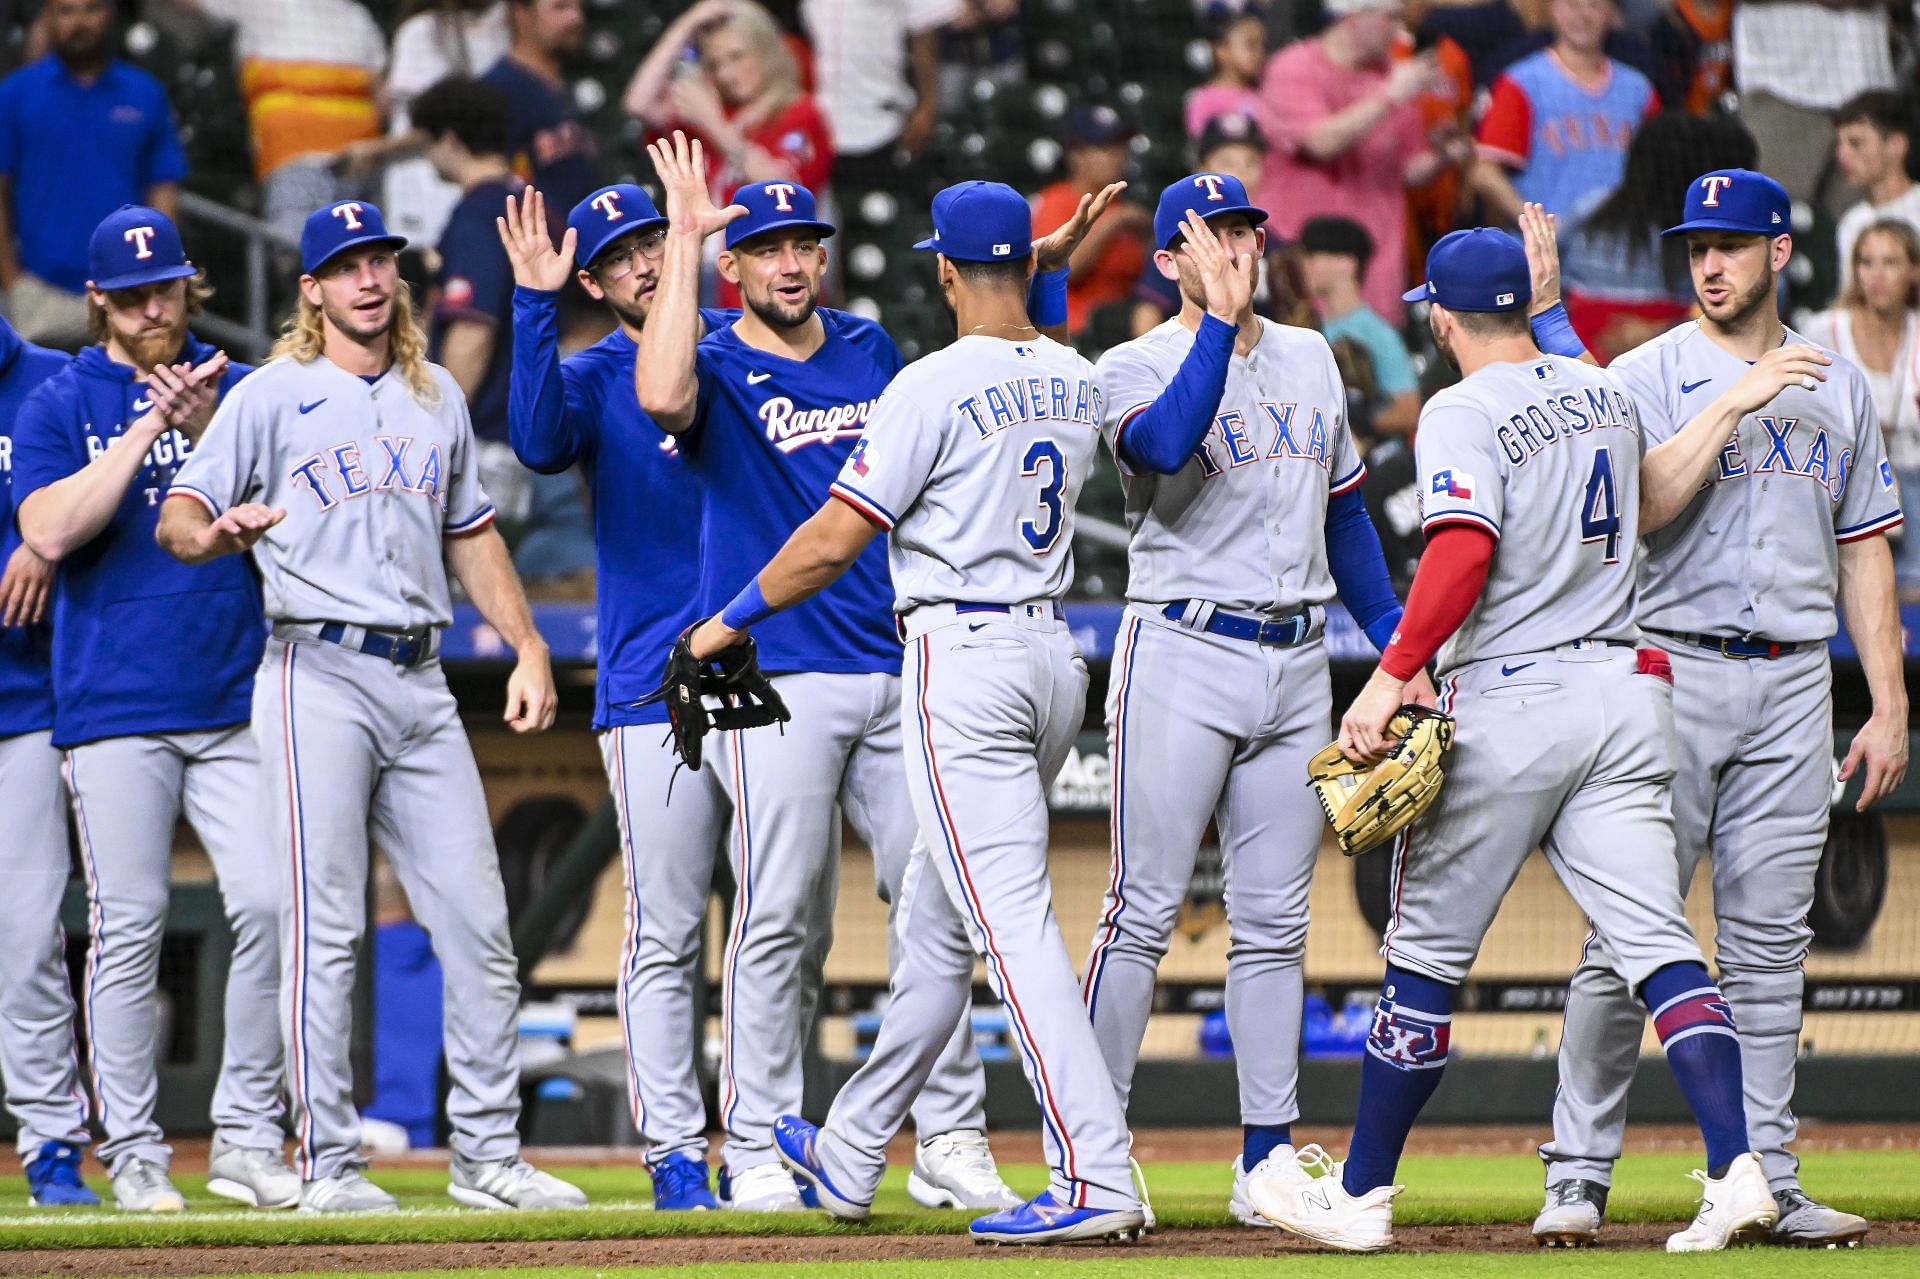 The Texas Rangers celebrate a victory over the Houston Astros at Minute Maid Park on July 26, 2023 in Houston, Texas. (Photo by Logan Riely/Getty Images)